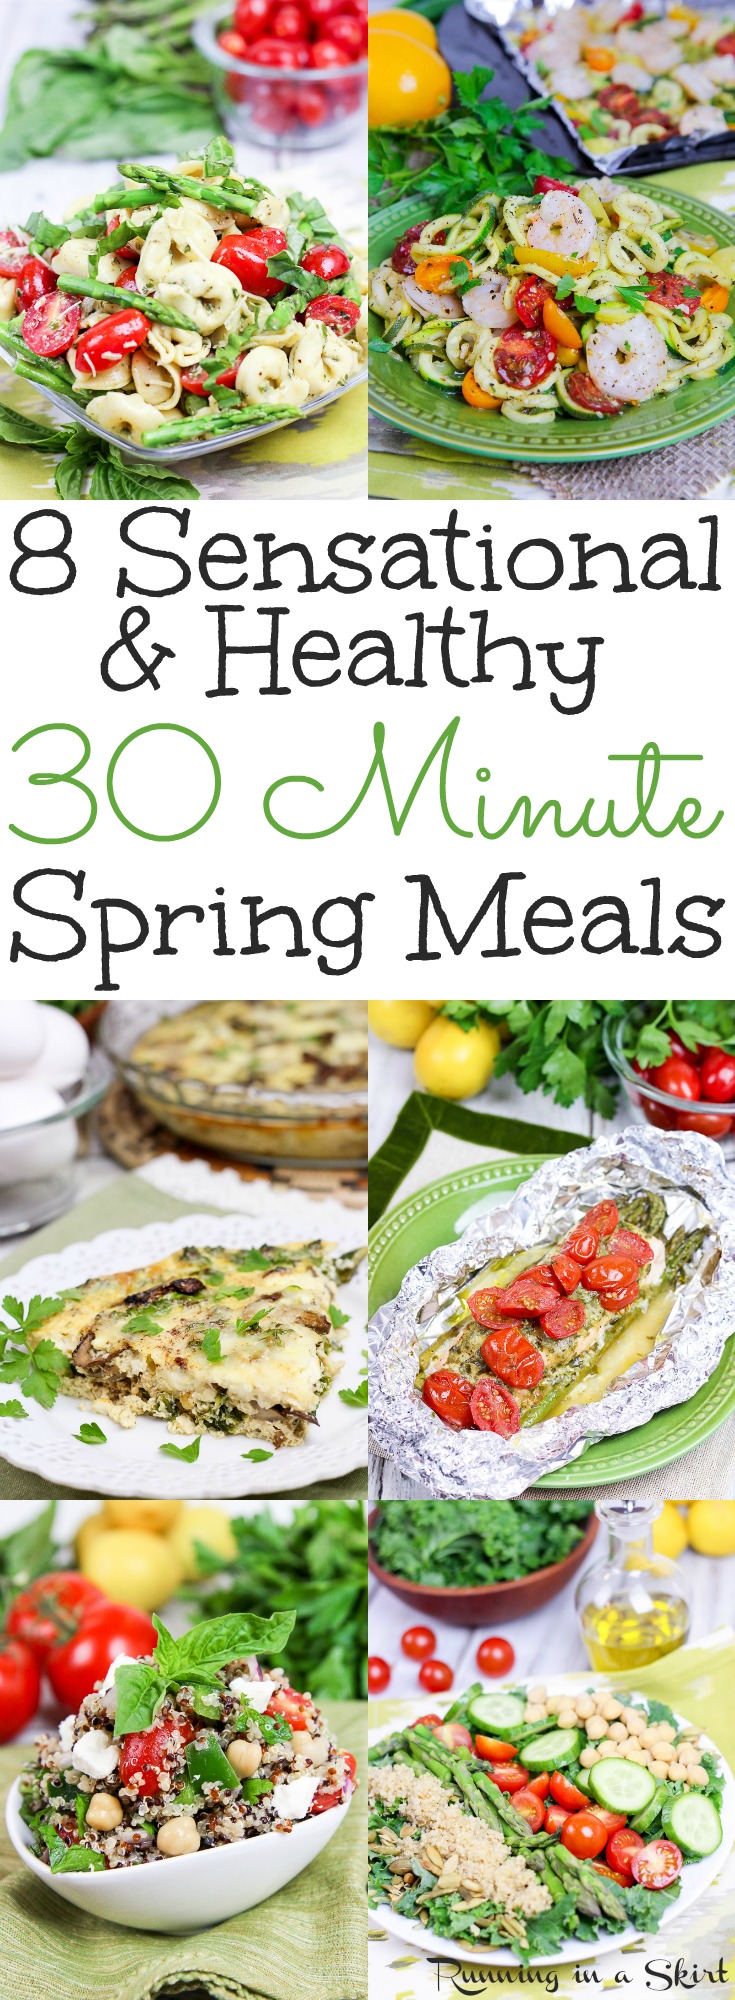 8 30 Minute Healthy Spring Meals - includes simple vegetarian & pescatarian recipes and lunch ideas for families.  Packed with veggies and some recipes use greek yogurt!  Includes low carb, paleo, vegan and dairy free options. / Running in a Skirt via @juliewunder